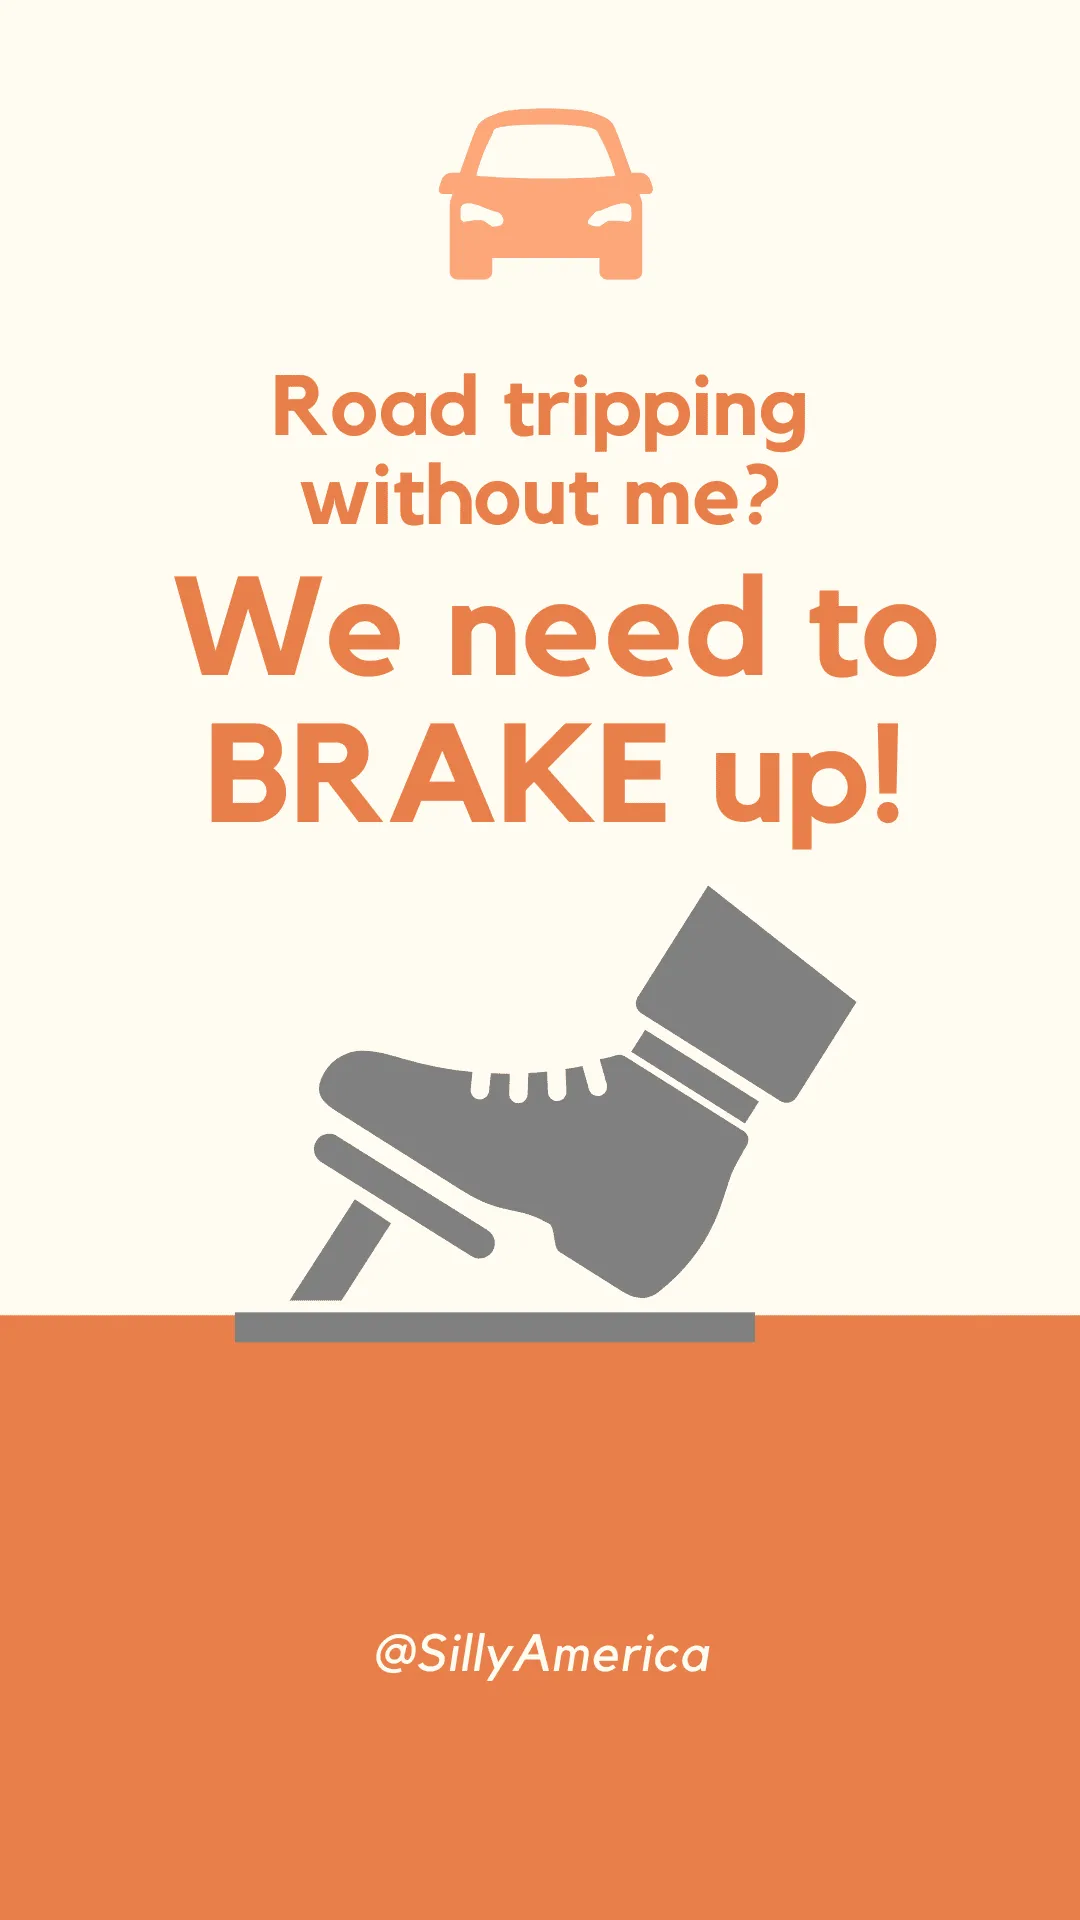 Road tripping without me? We need to BRAKE up! - Car Puns to fuel your road trip content!